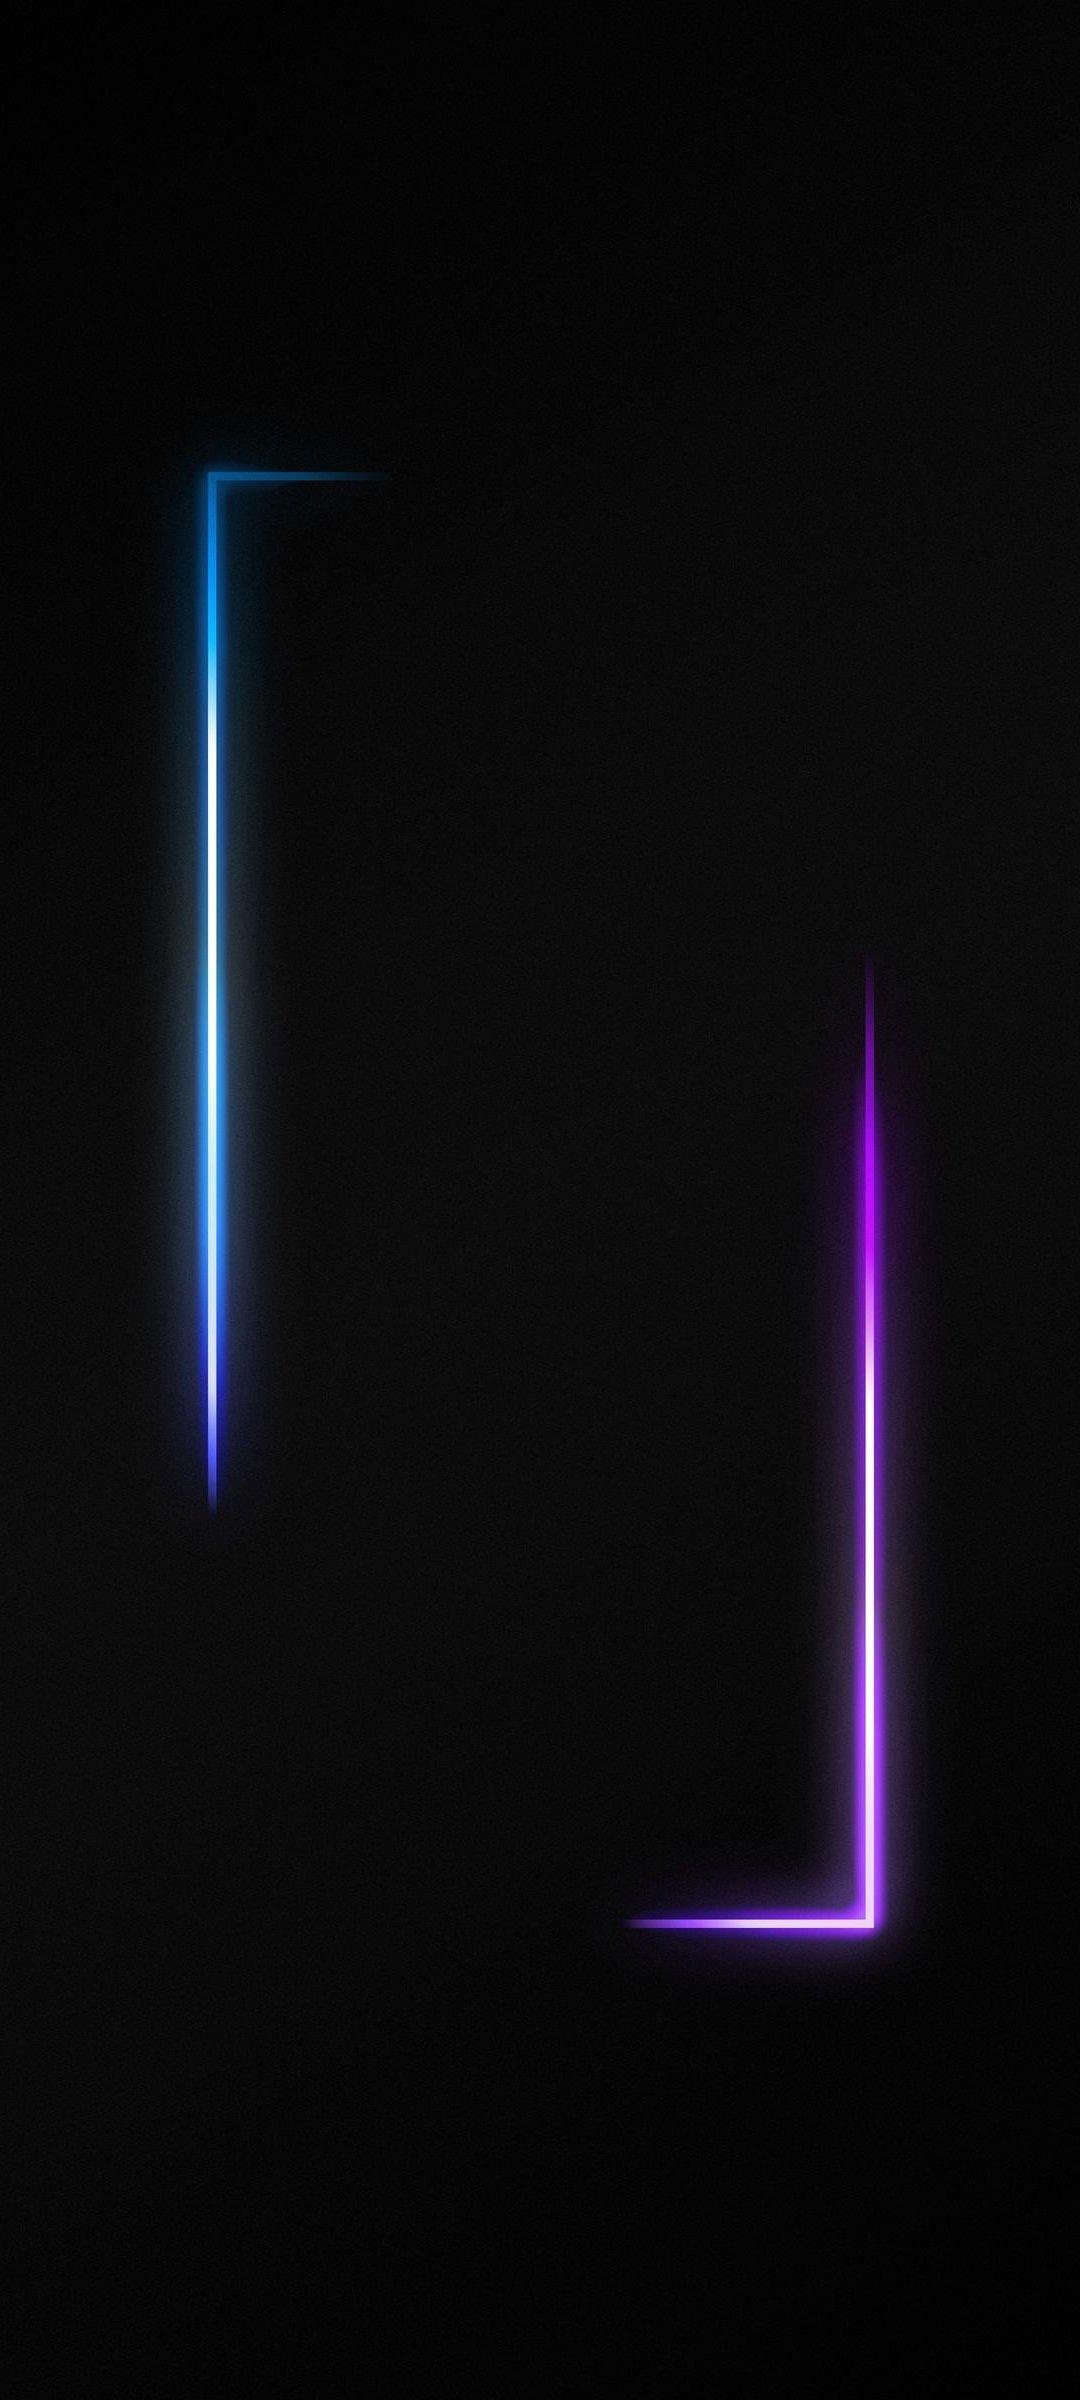 1080x2400 Amoled Wallpapers - Top Free 1080x2400 Amoled Backgrounds